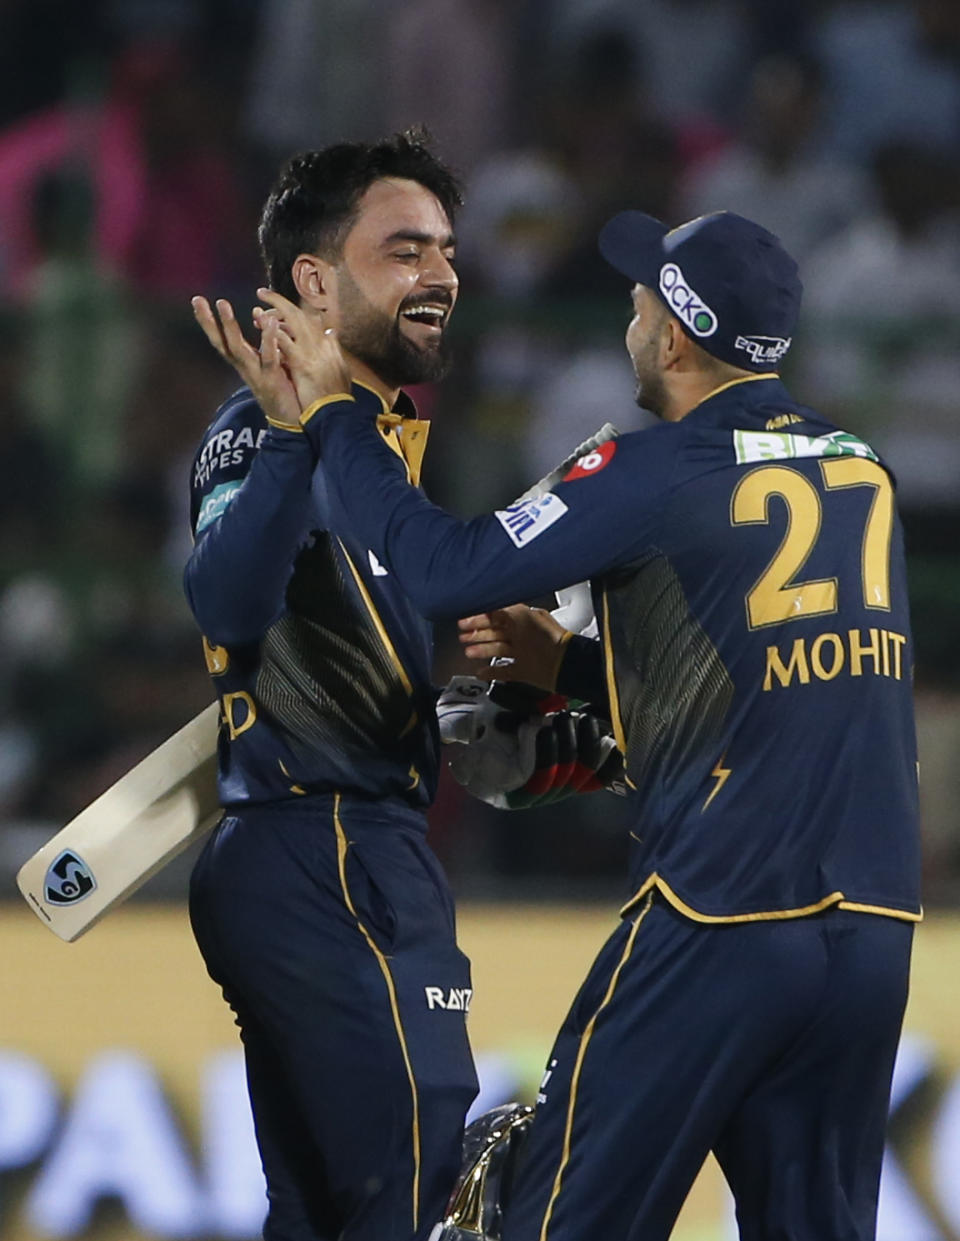 Gujarat Titans' Rashid Khan, left, celebrates with teammate Mohit Sharma after scoring the winning runs during the Indian Premier League cricket match against Rajasthan Royals in Jaipur, India, Wednesday, April 10, 2024. (AP Photo/Surjeet Yadav)